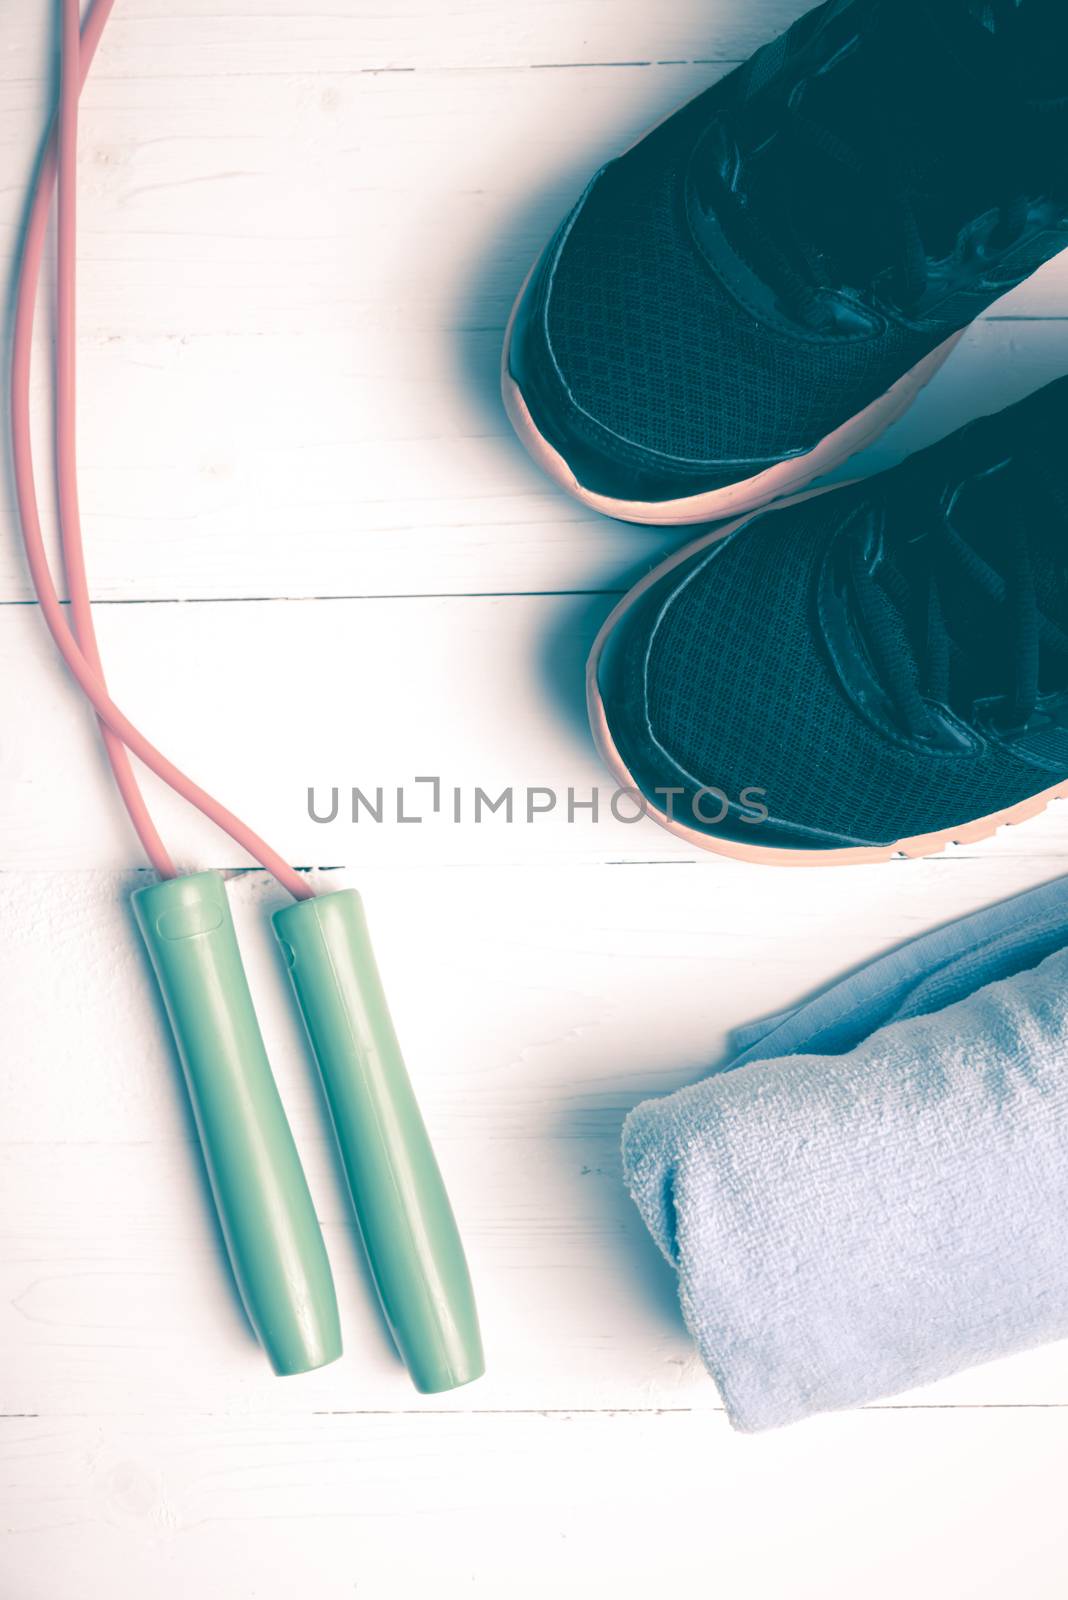 fitness equipment:blue towel,jumping rope and running shoes on white wood table vintage style